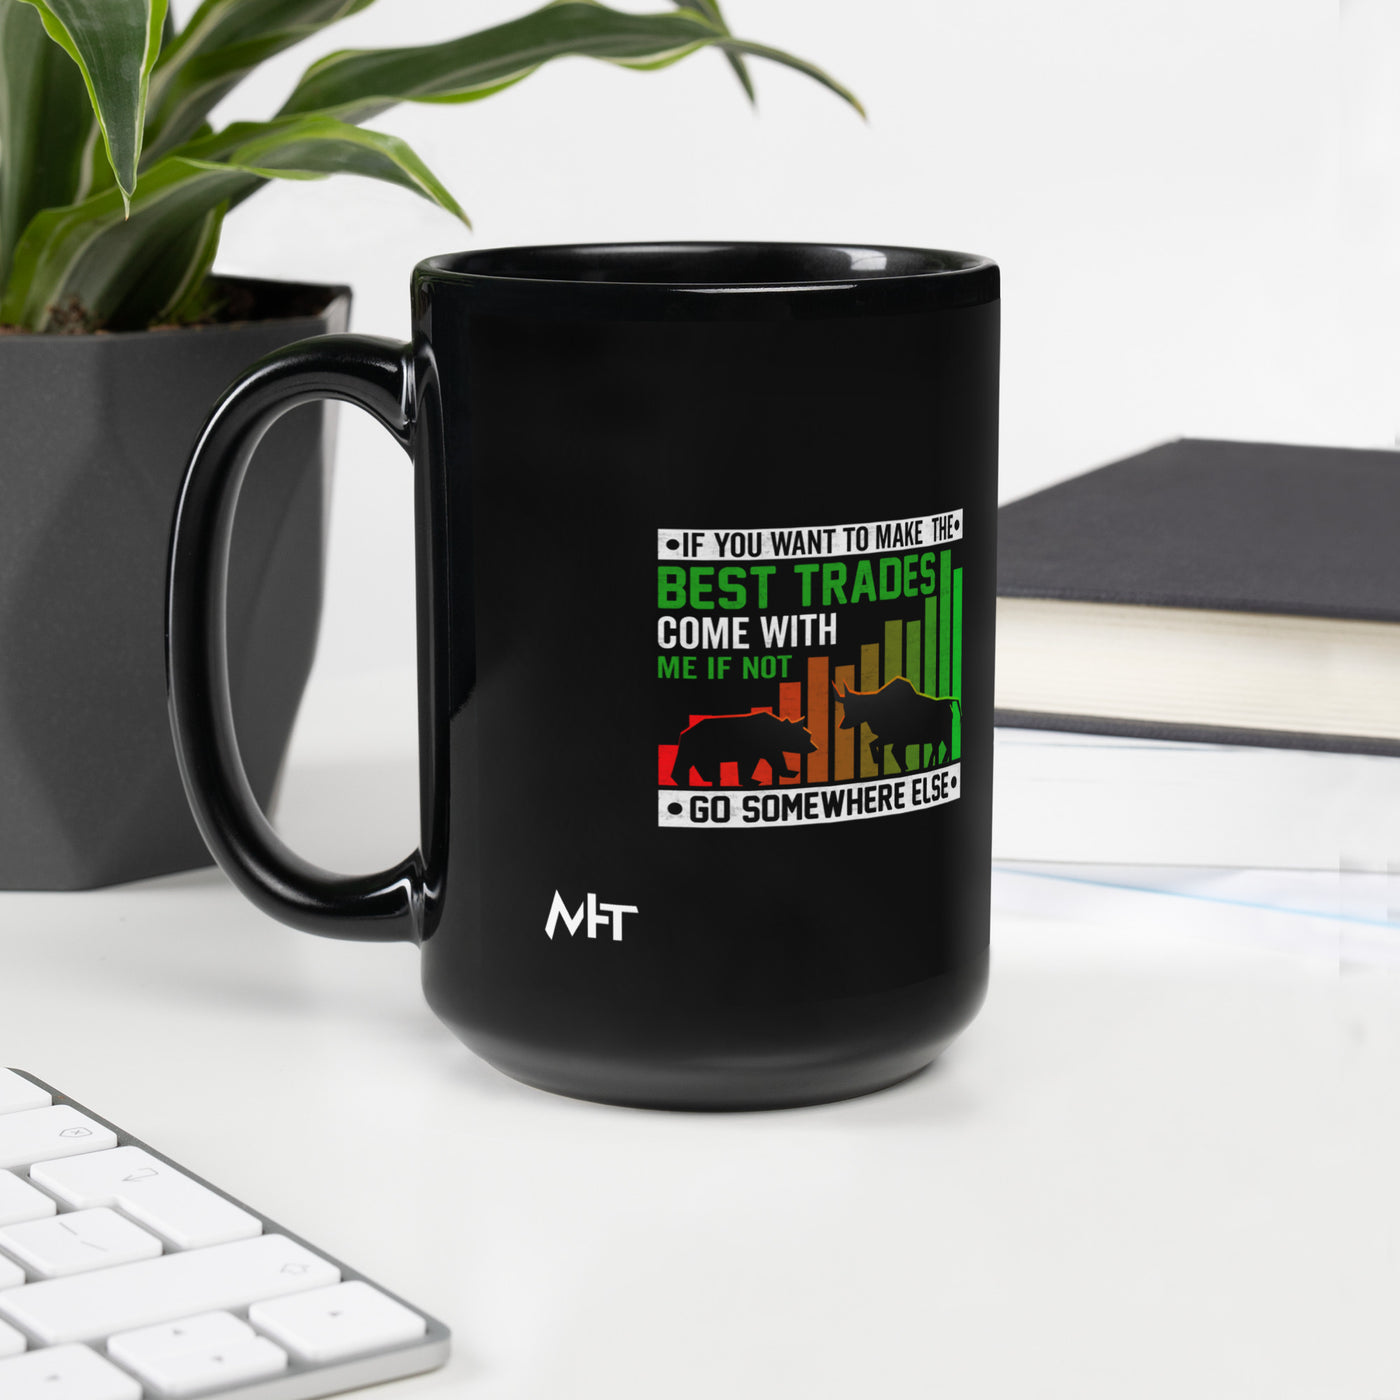 If you Want to Make the best trades, Come with me if not, go somewhere else Eyasir - Black Glossy Mug